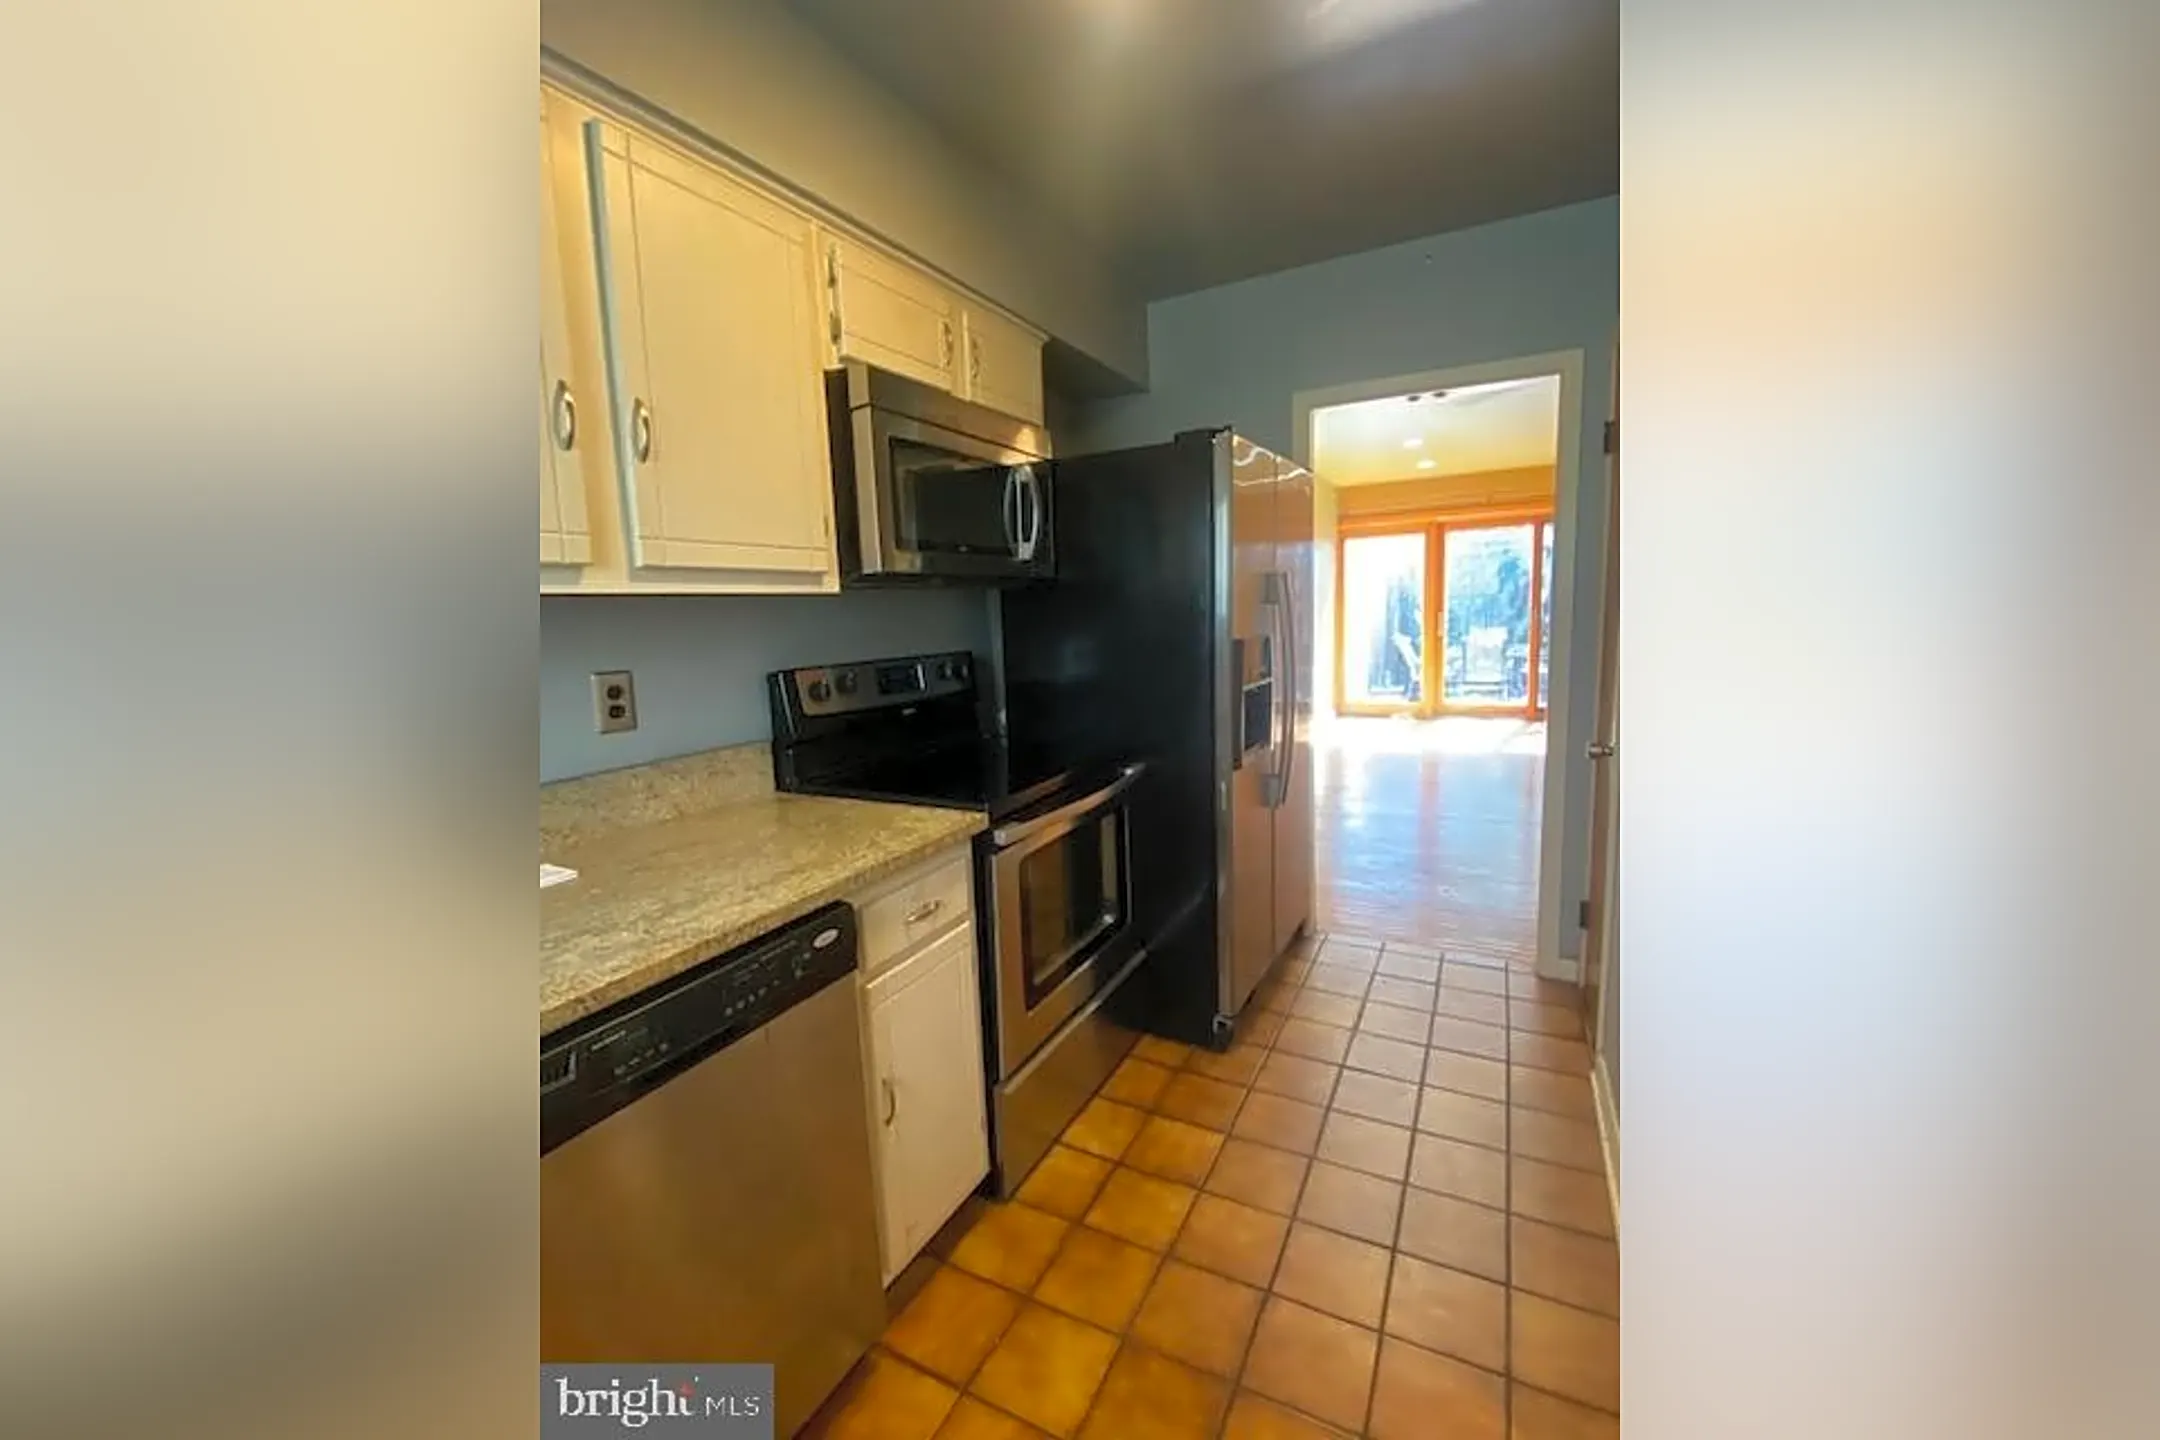 Kitchen - 106 W Montgomery Ave #7 - Ardmore, PA